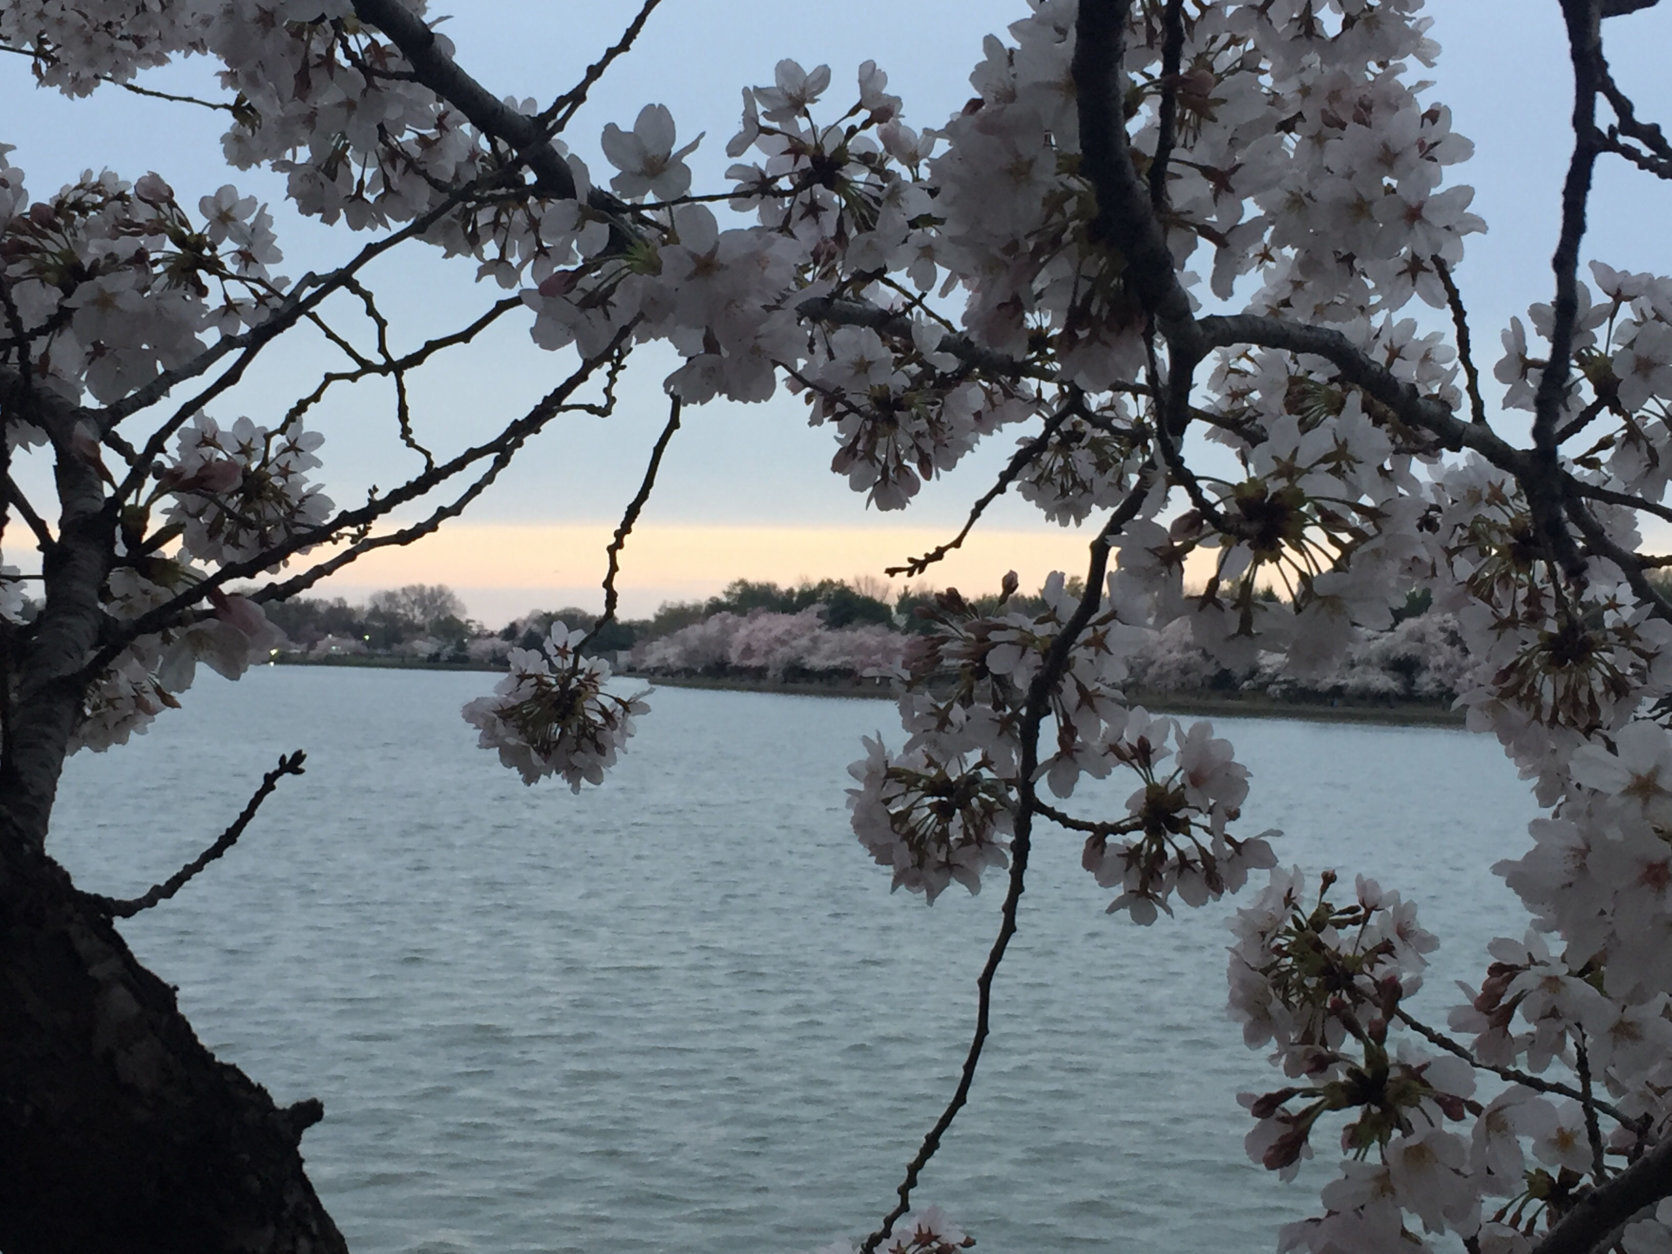 With traffic along Ohio Drive going one way during the cherry blossom festival, and parking sure to be at a premium as the day goes on, walking from any of the nearby Metro stations or taking the Circulator Bus to the Tidal Basin is the recommended way to visit. (WTOP/John Domen)